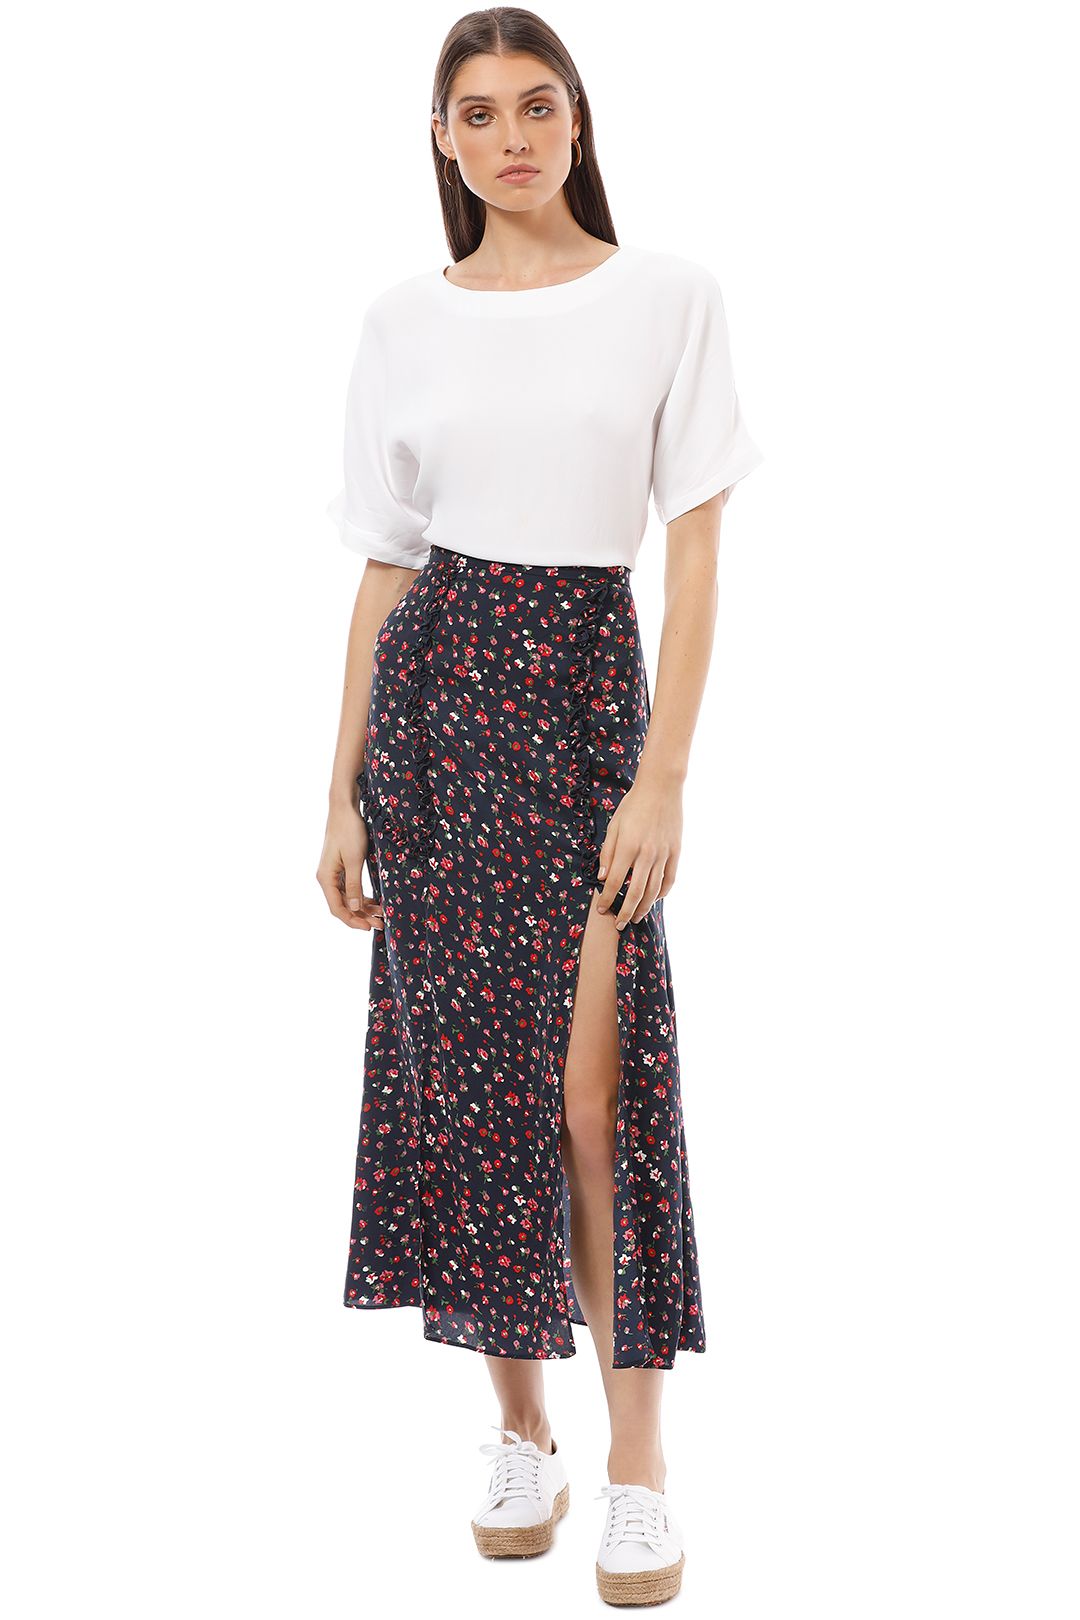 The Fifth - Sonic Skirt - Floral - Front